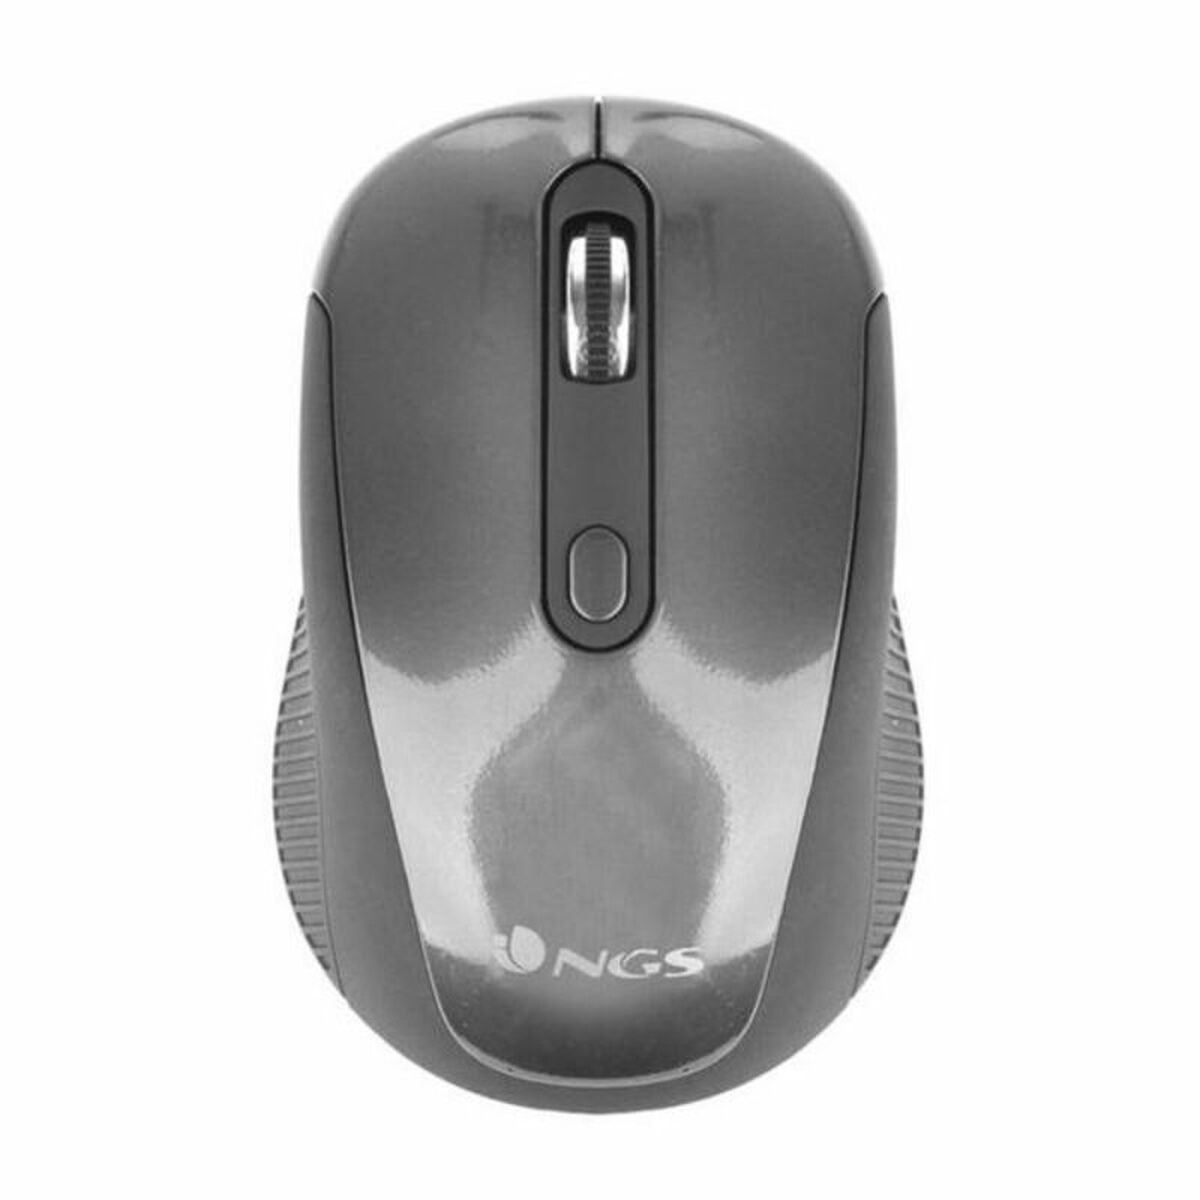 Optical Wireless Mouse NGS HAZE USB 2.0 1600 dpi Grey, NGS, Computing, Accessories, optical-wireless-mouse-ngs-haze-usb-2-0-1600-dpi-grey, Brand_NGS, category-reference-2609, category-reference-2642, category-reference-2656, category-reference-t-19685, category-reference-t-19908, category-reference-t-21353, computers / peripherals, Condition_NEW, hot deals, office, Price_20 - 50, Teleworking, RiotNook